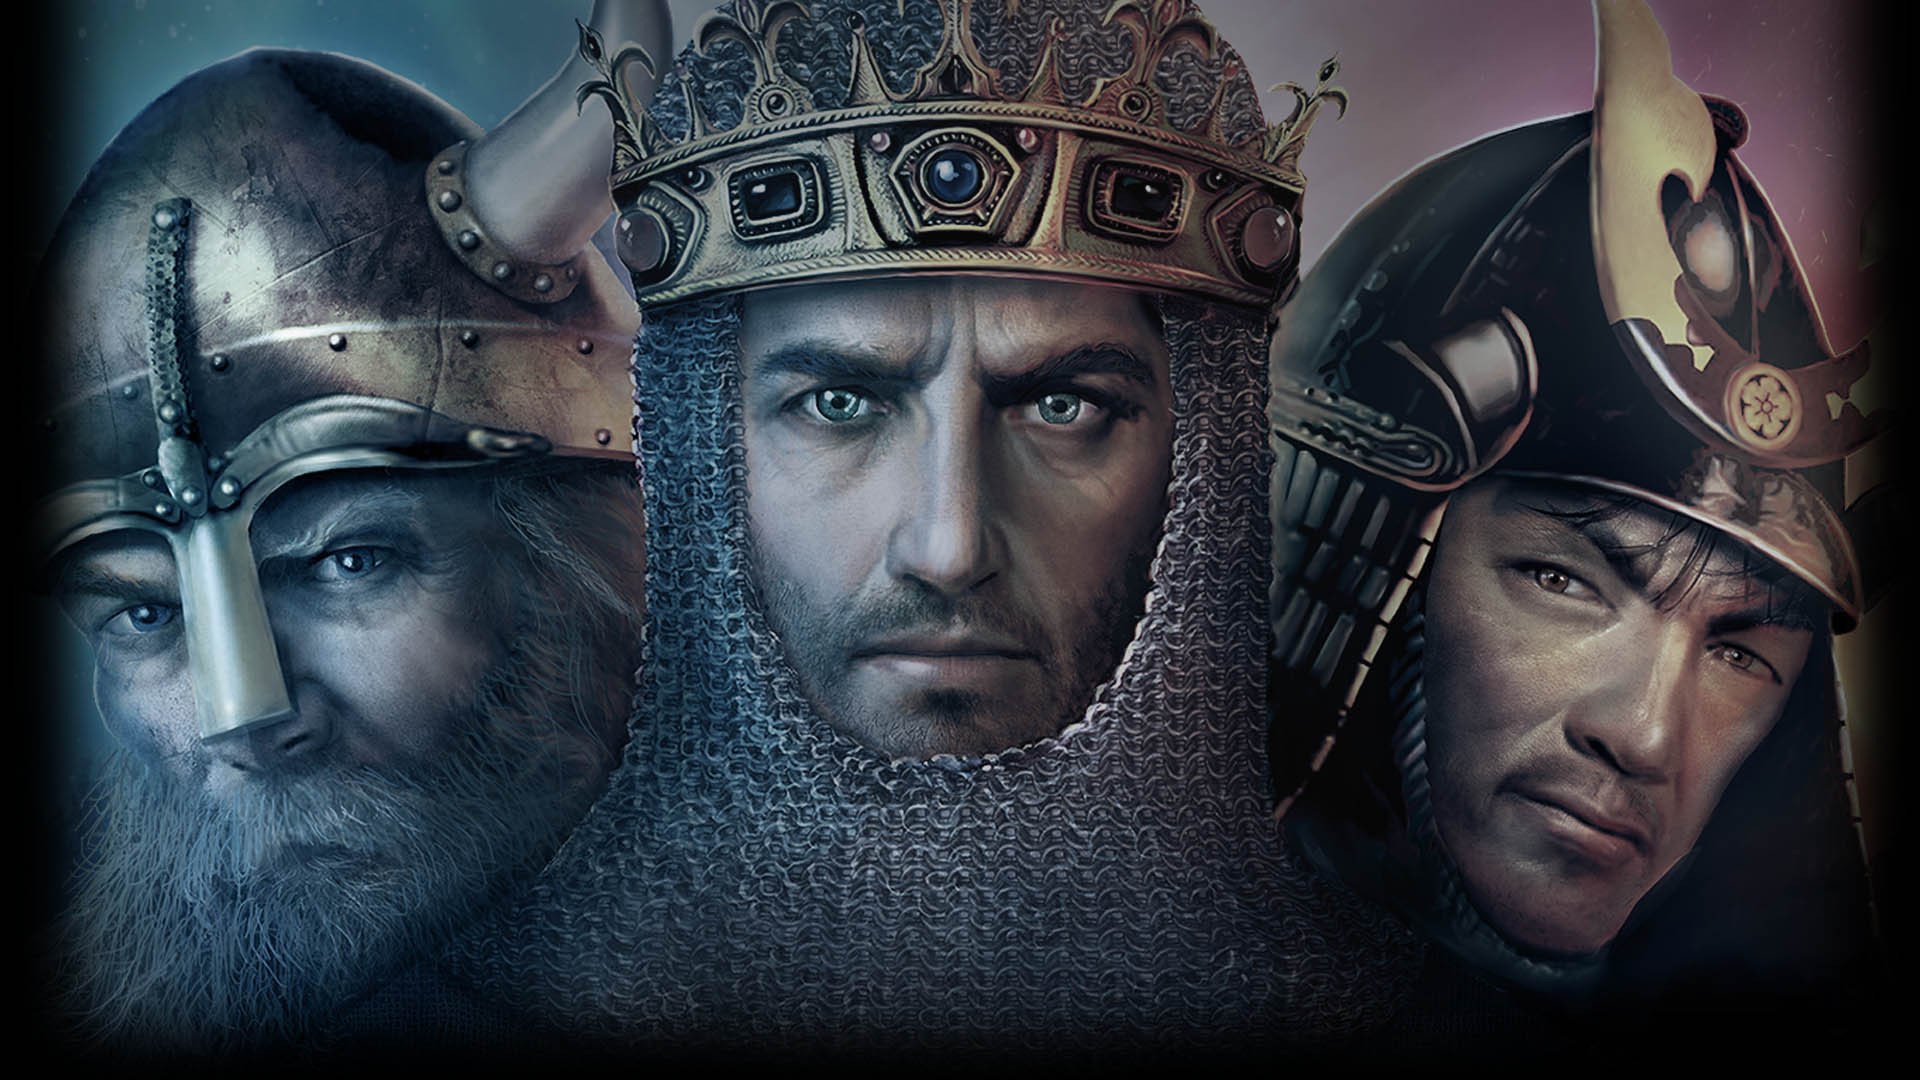 Age of Empires II HD Wallpapers